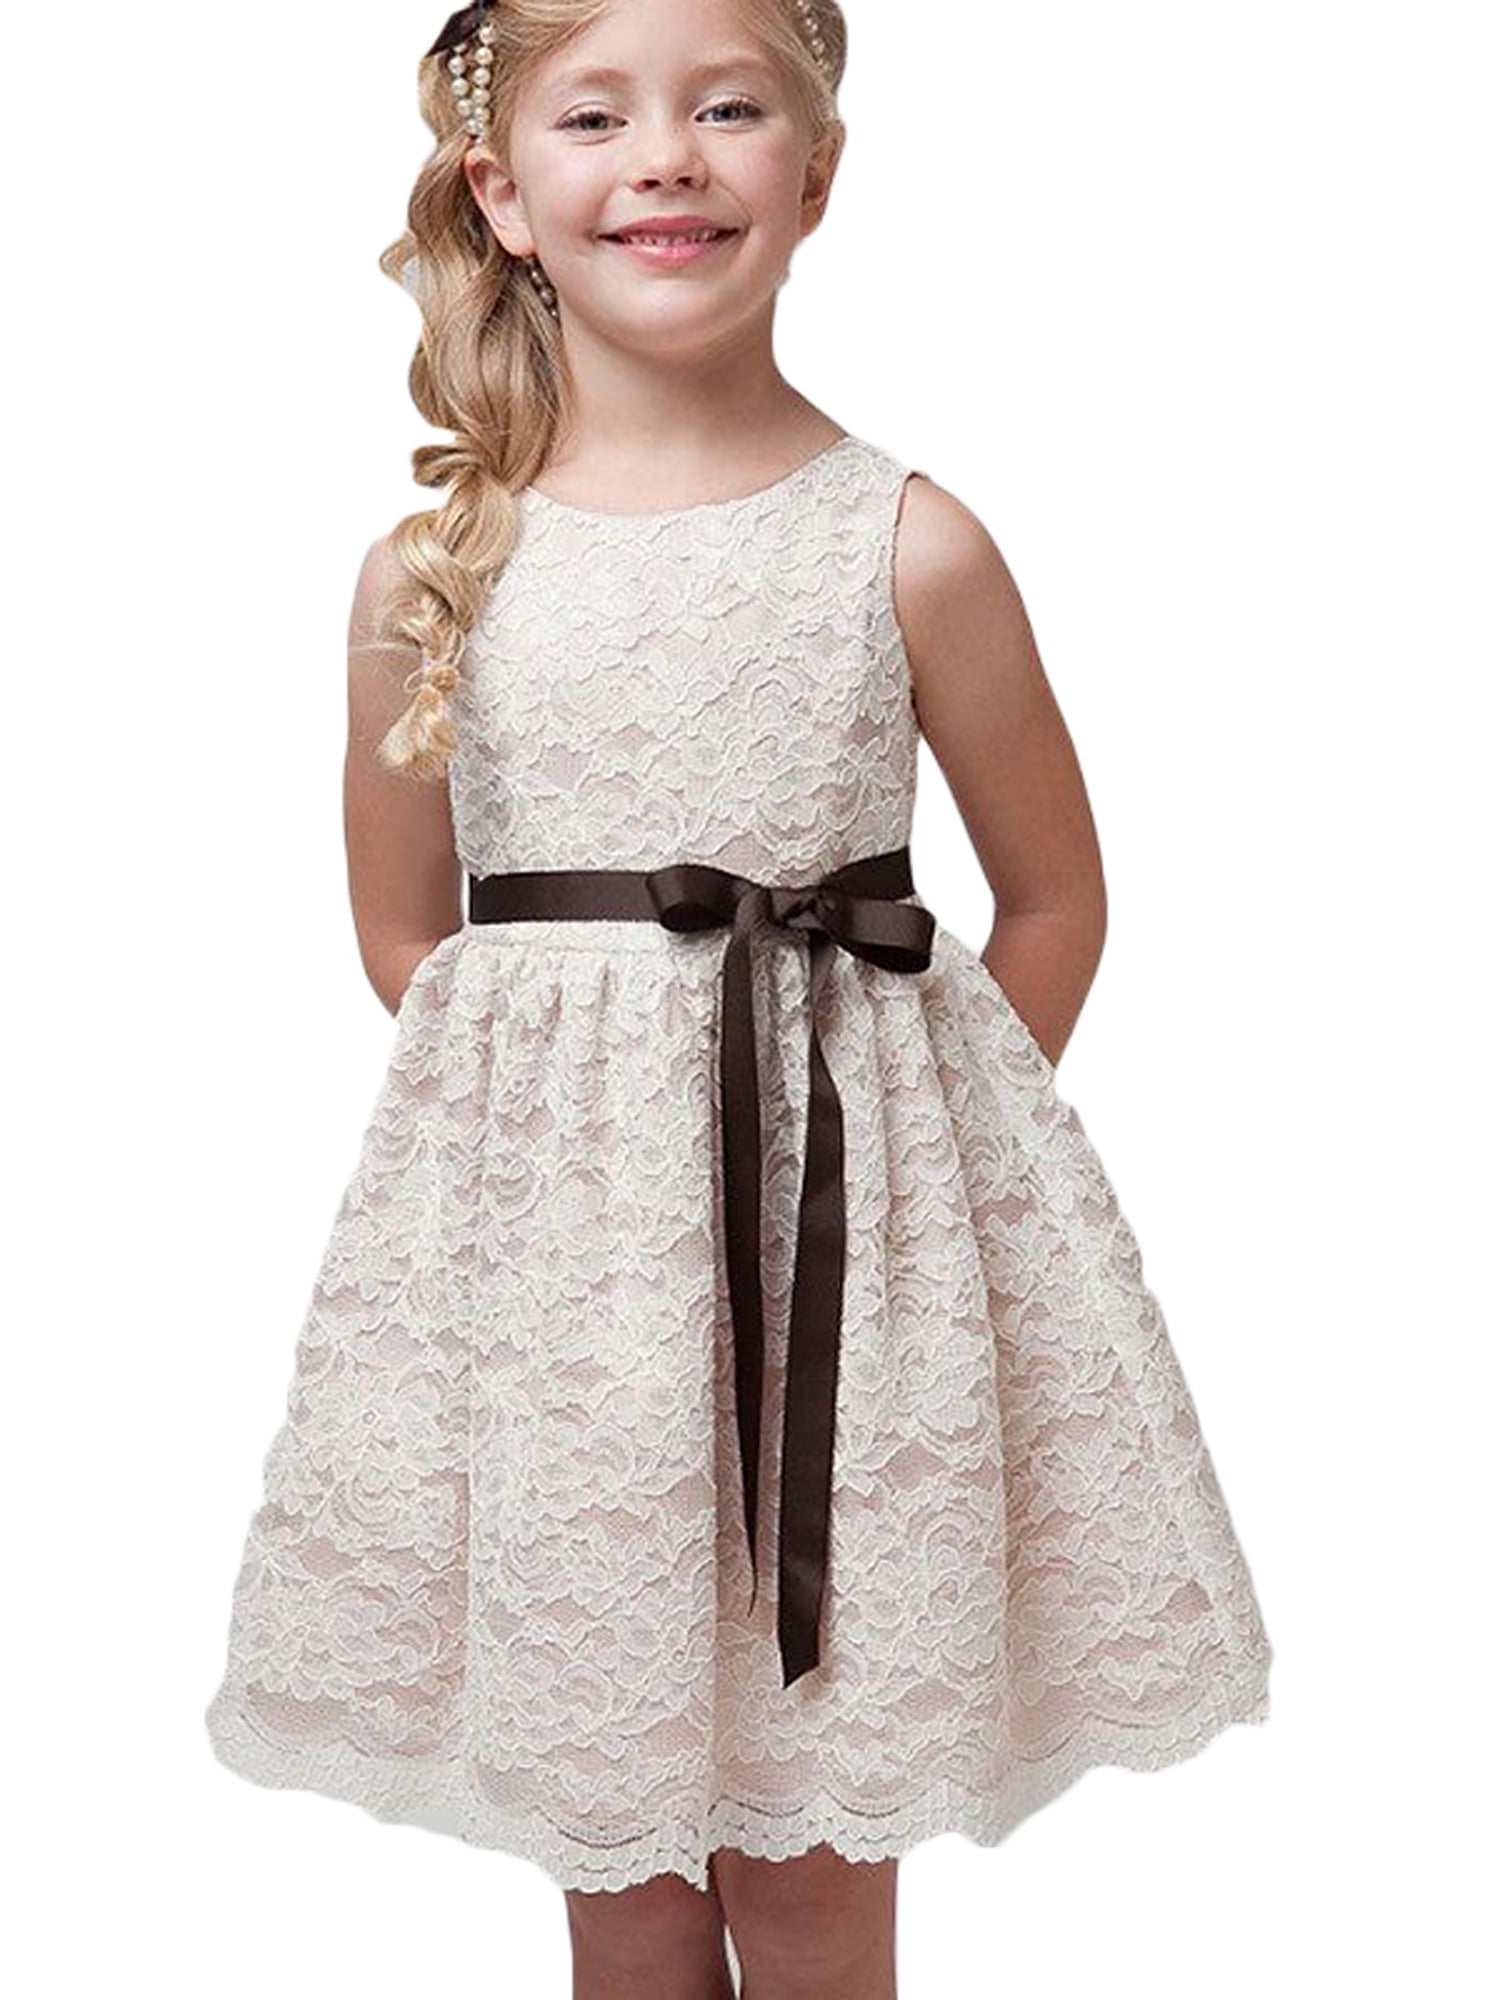 Baby Flower Girl Birthday Wedding Bridesmaid Pageant Party Formal Dress SZ 3M-3T 